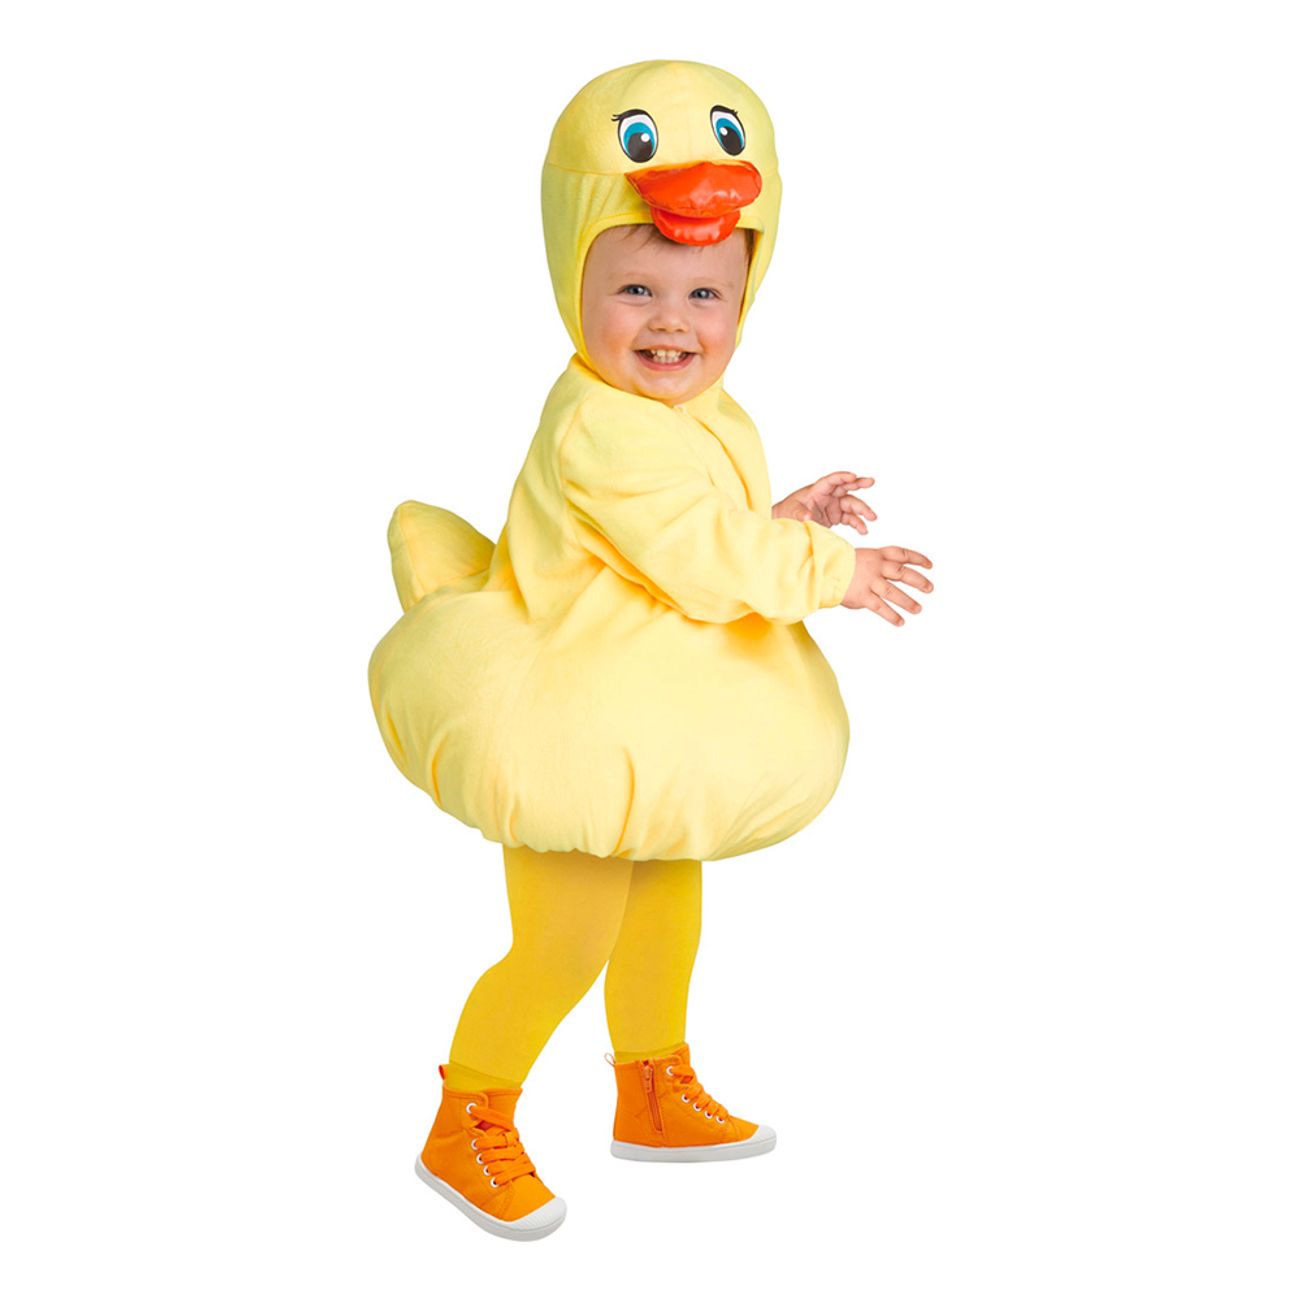 rubber-ducky-toddler-costume-l-84114-1